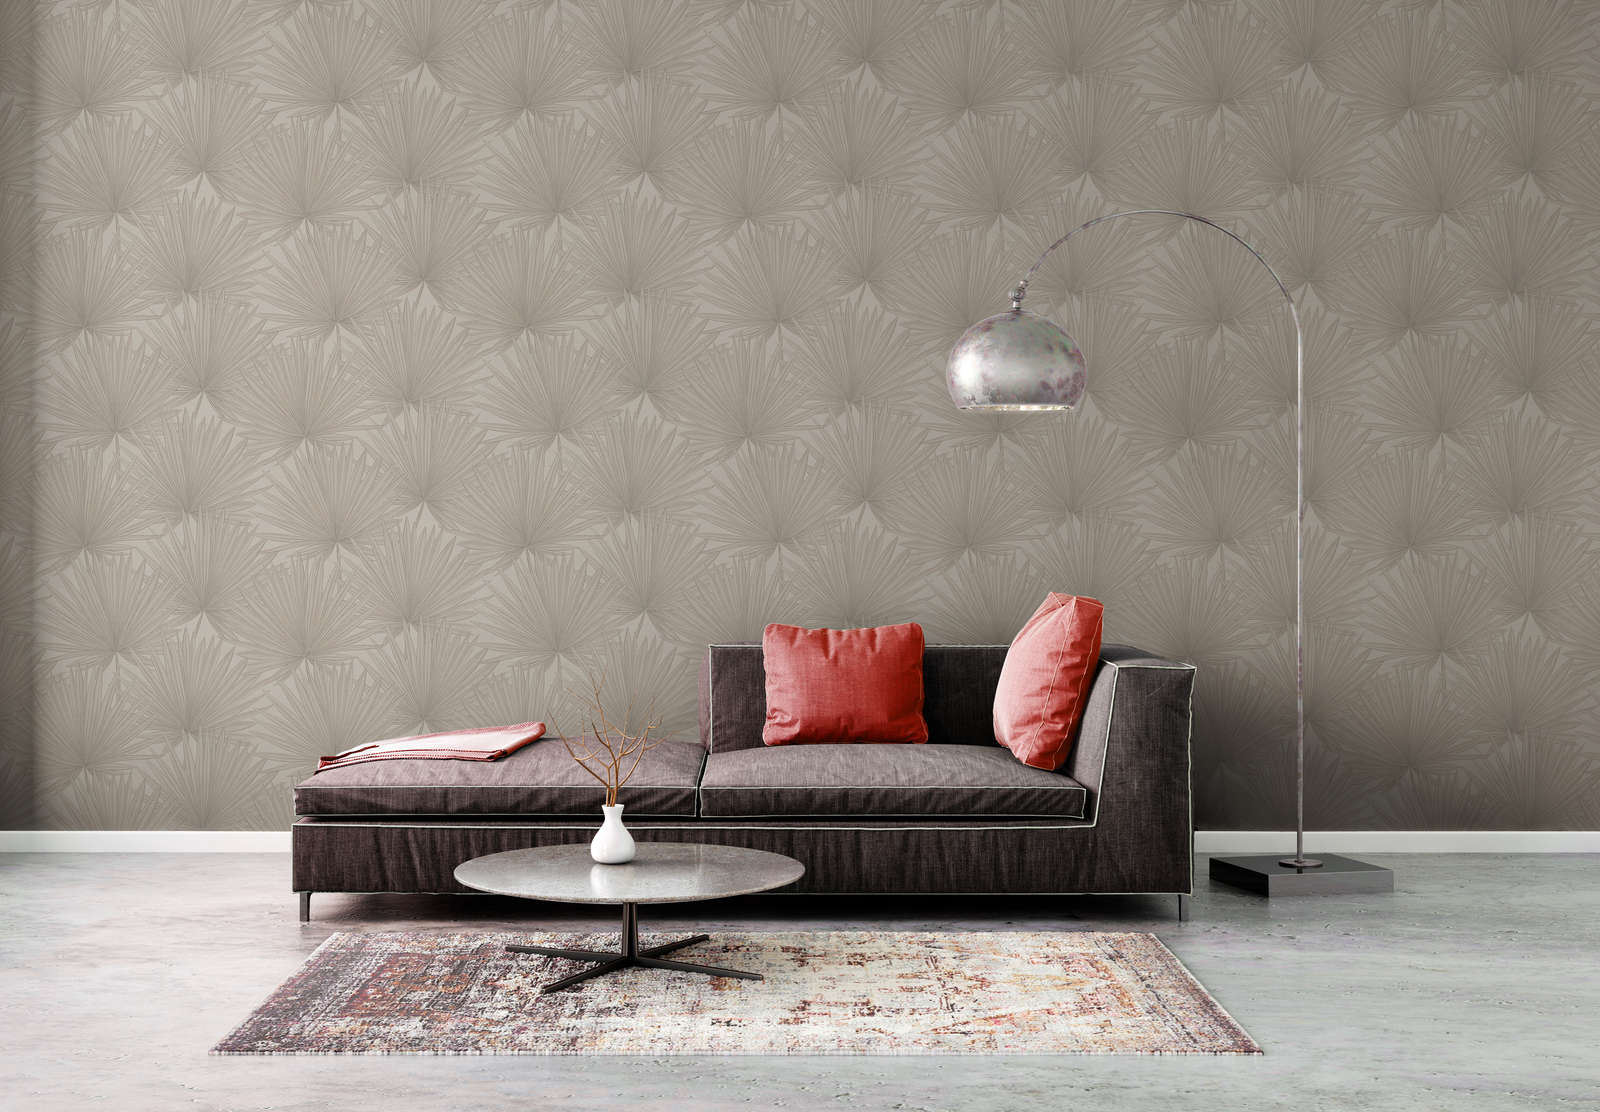             Non-woven wallpaper in jungle look on a subtle background - grey, white
        